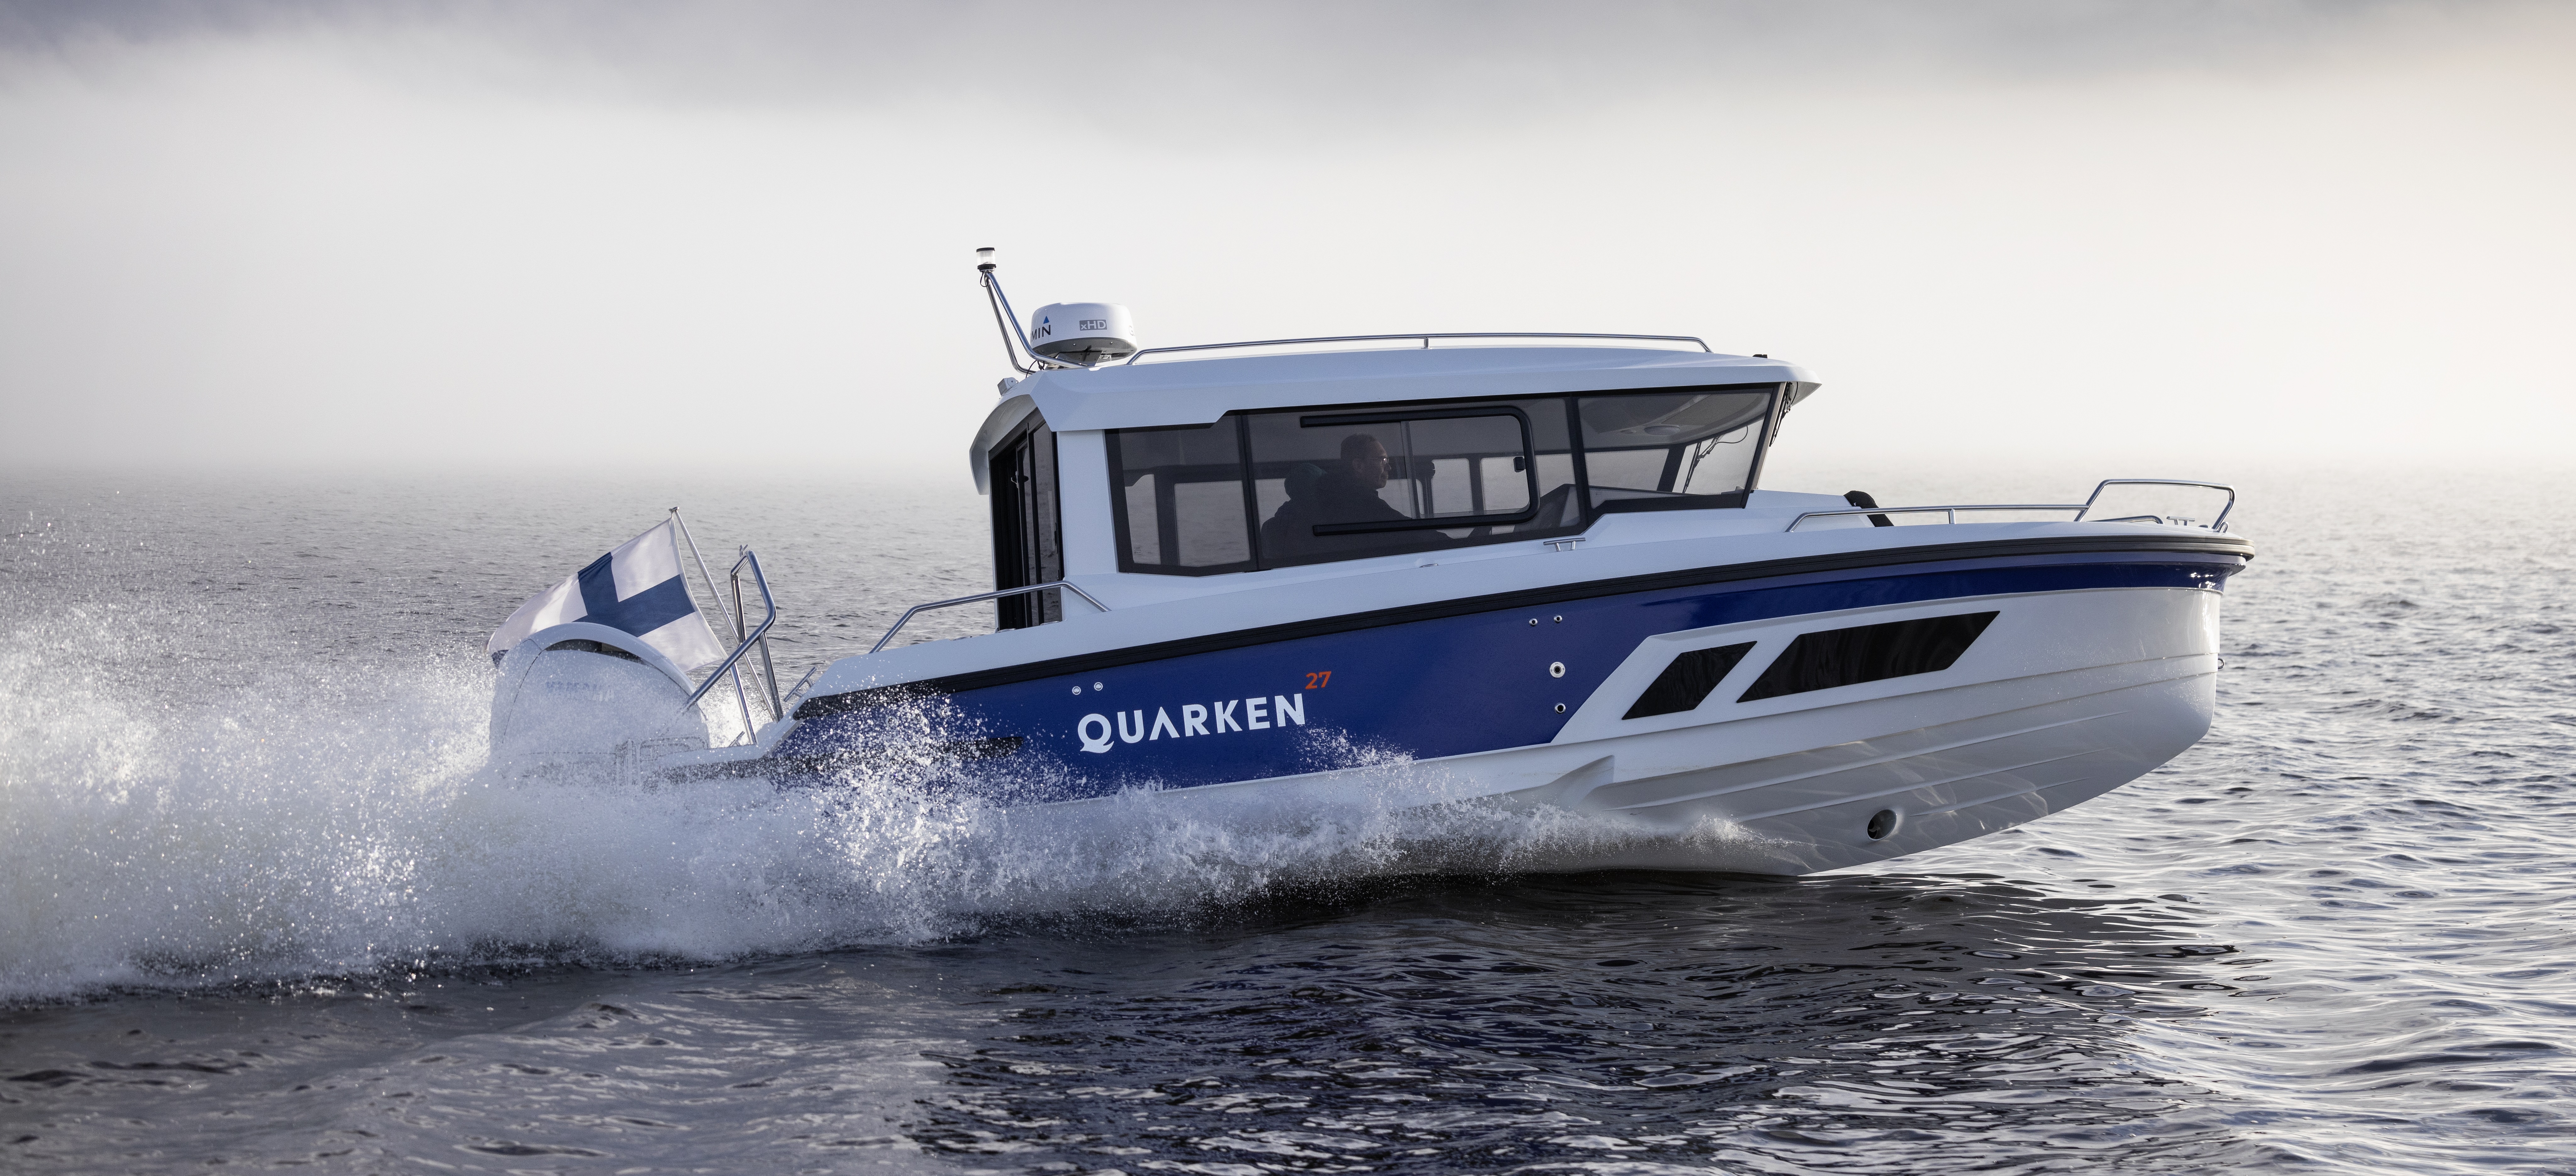 Quarken 27 Cabin motorboat cruises the sea at high speed. The all-weather model has a closed wheelhouse. To the right and left of the boat, the water is splashing. 